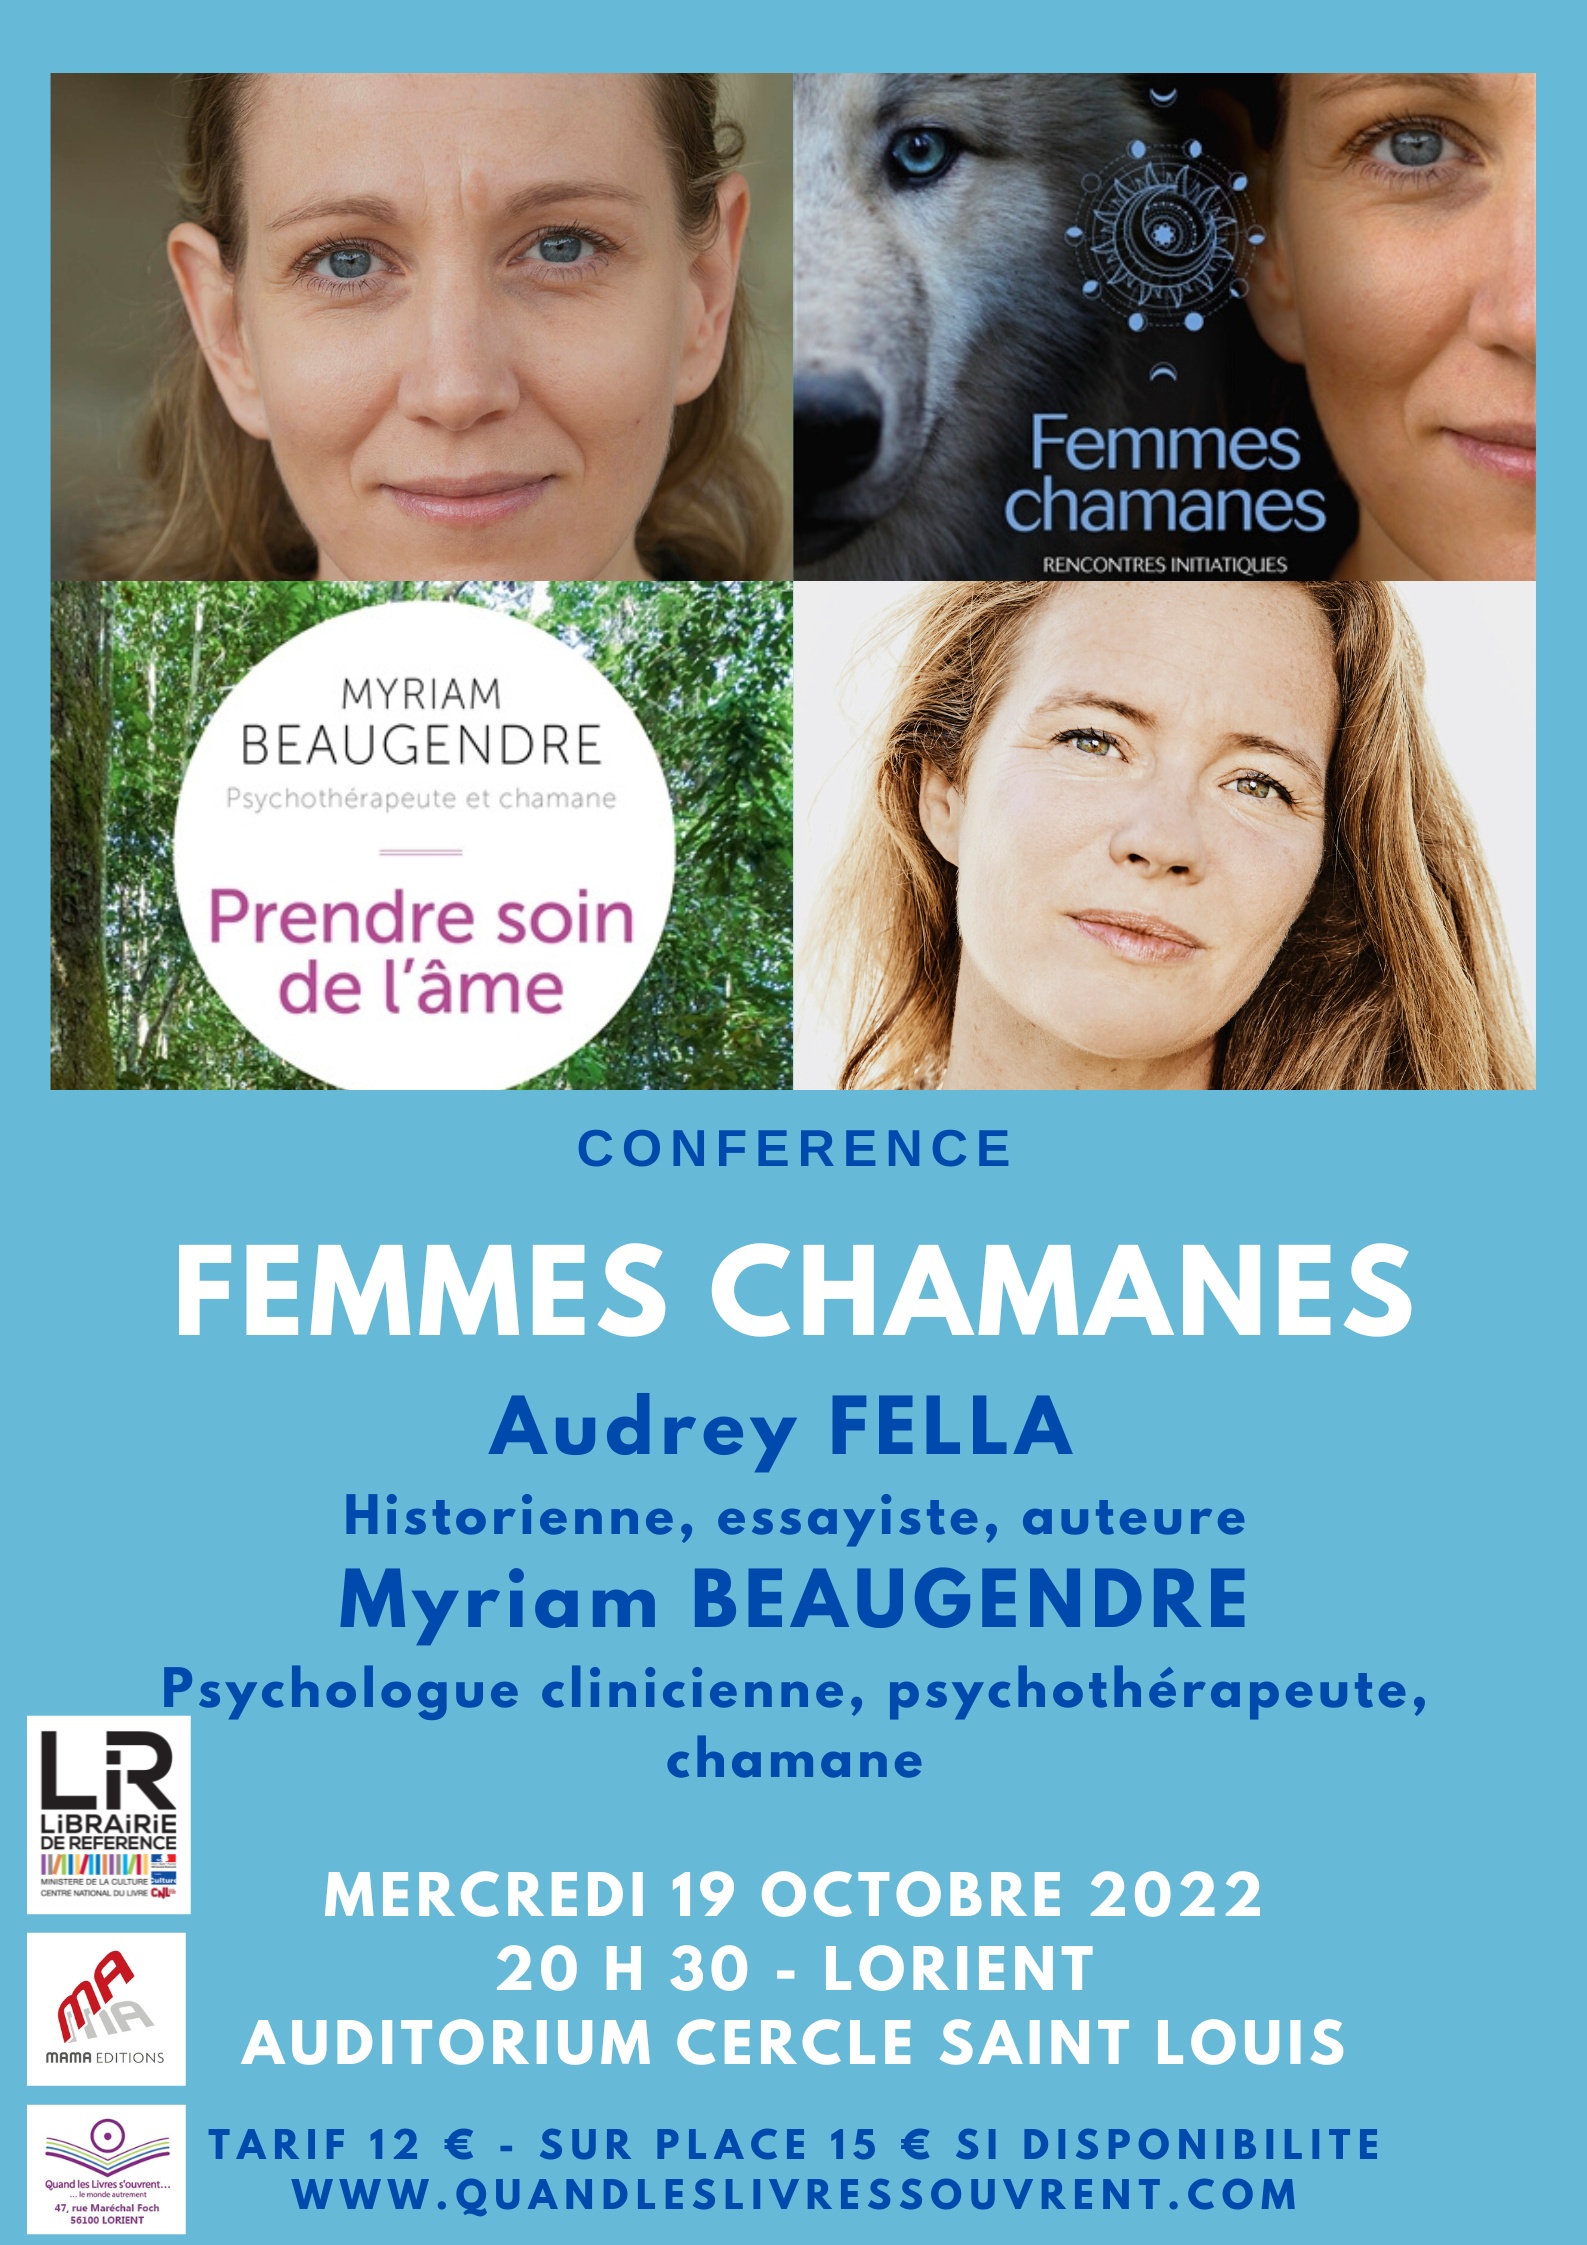 CONFERENCE...FEMMES CHAMANES